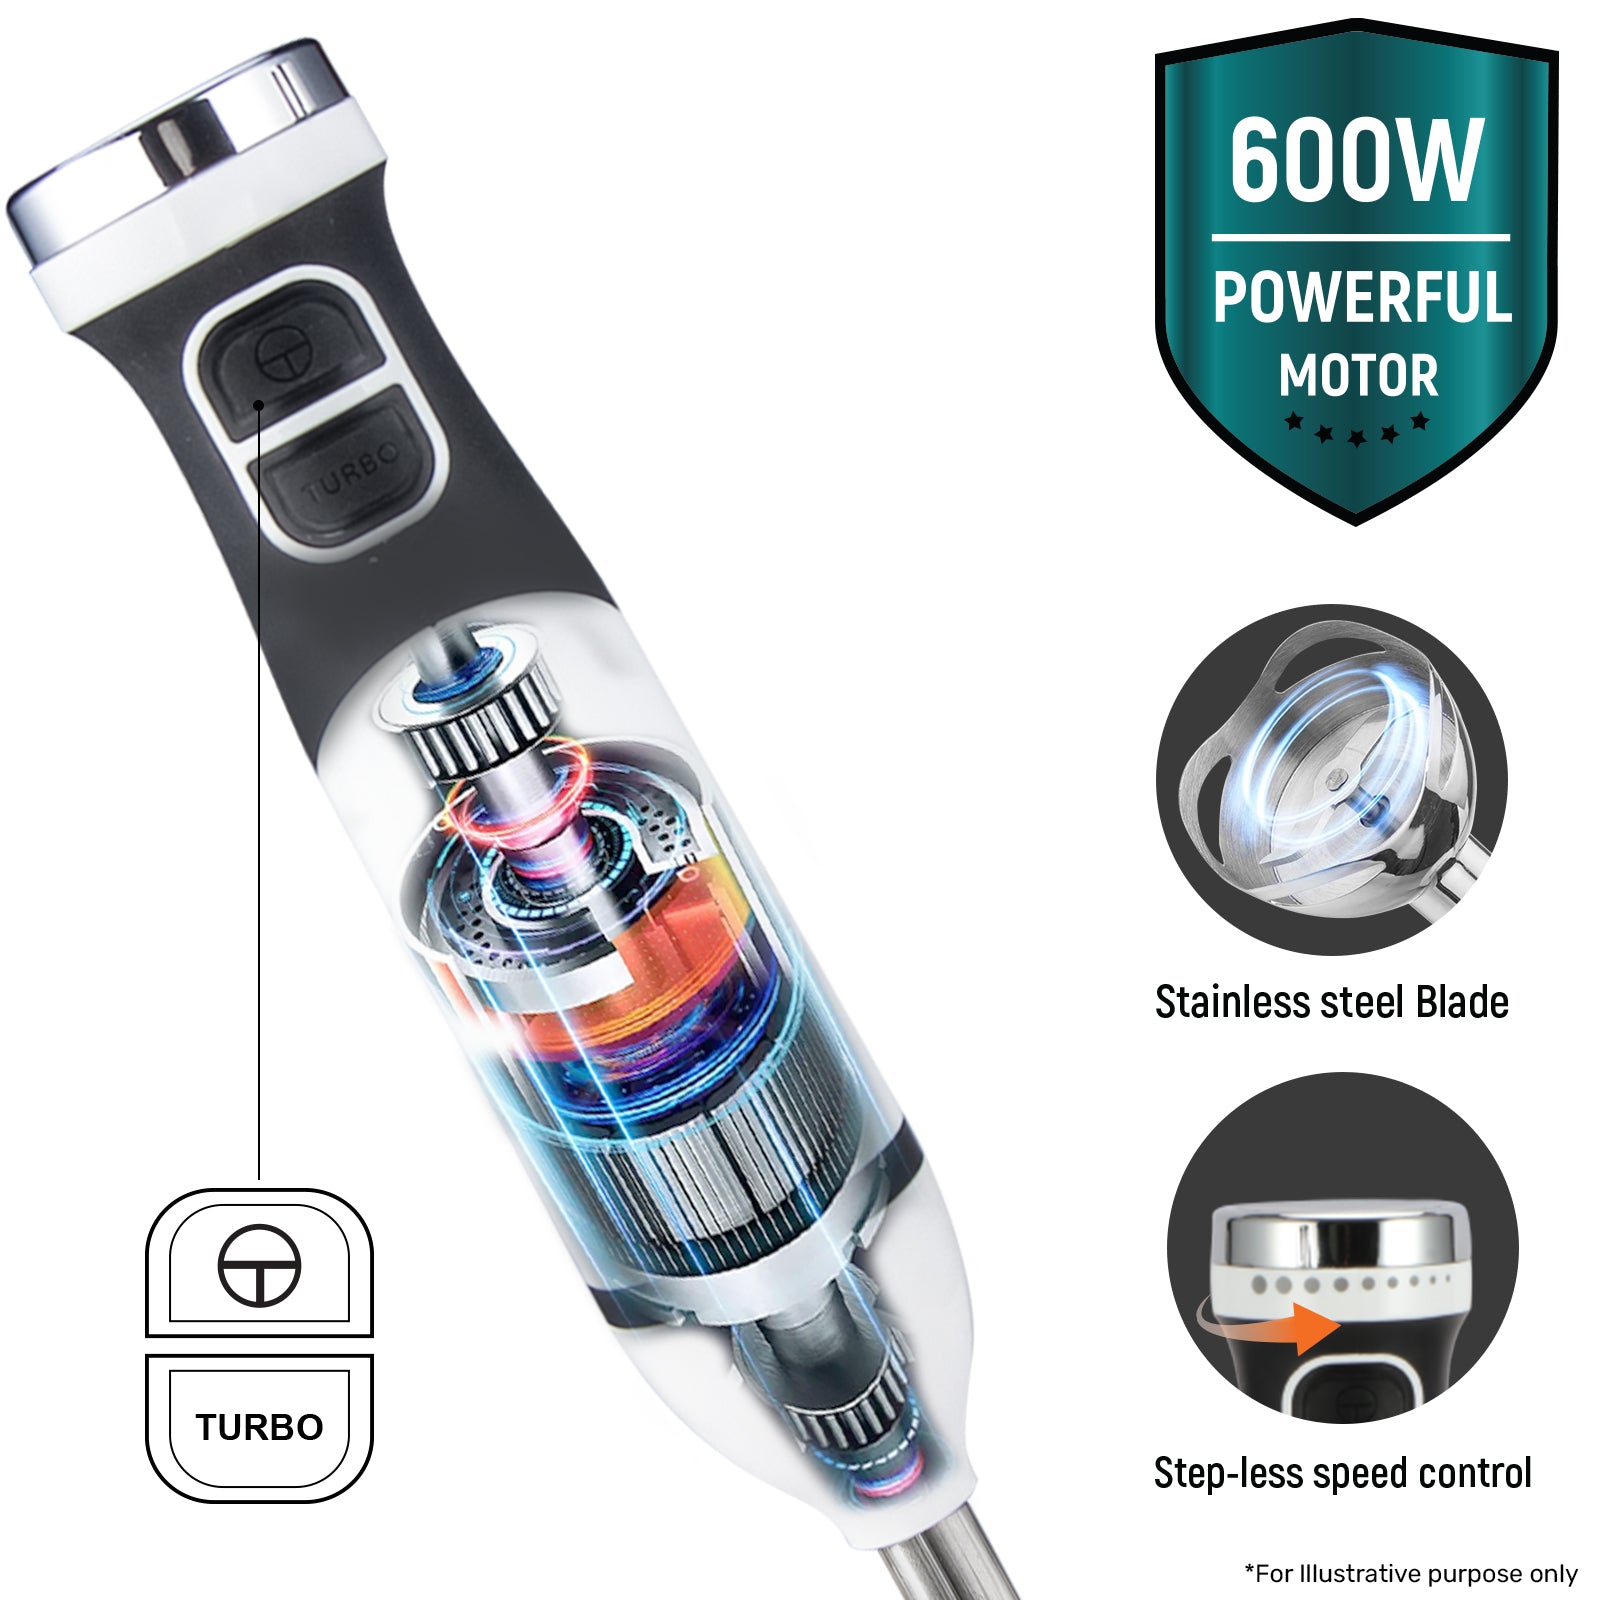 Paul Russell Stainless Steel Hand Blender 3 in 1 Stick Blender with 600W Power, 2-Speed Control, Turbo Function, Low Noise, Detachable Parts - Includes Chopper Cup, Whisk, 500ml Measuring Cup with Lid